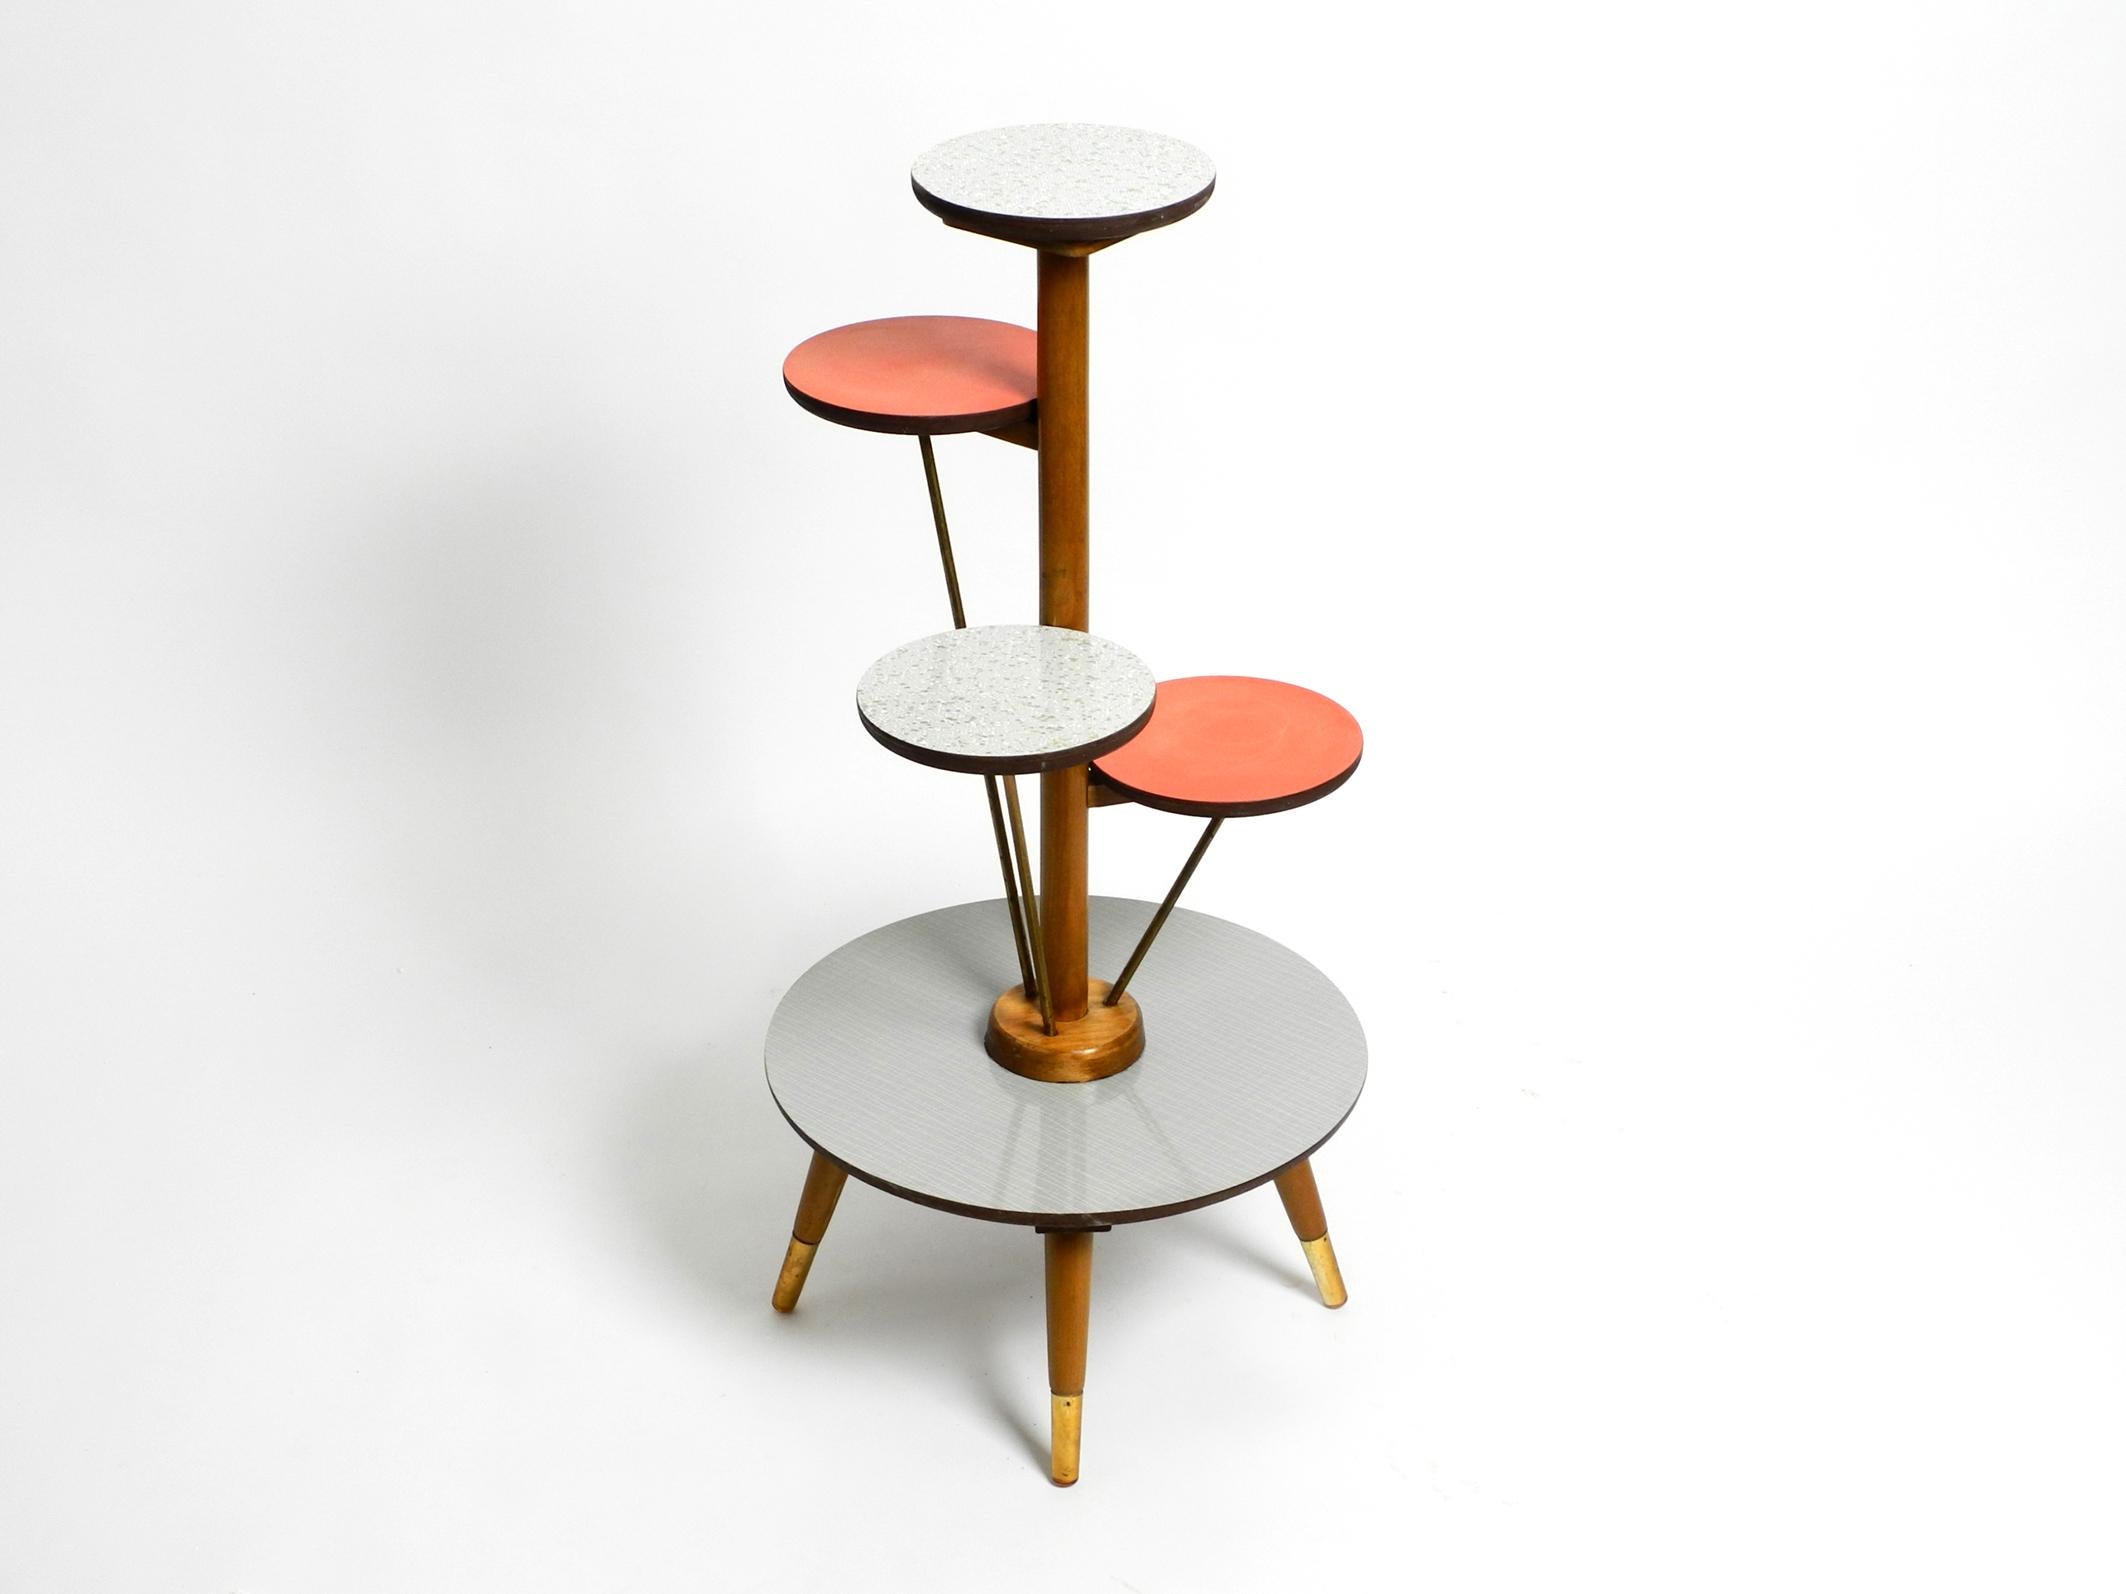 Beautiful extraordinary large four-legged Mid-Century Modern plant stand.
Great typical design of that time. Made in Germany.
Frame and all round and colored shelves are made of wood with colorful Formica surfaces.
The wooden legs are partly